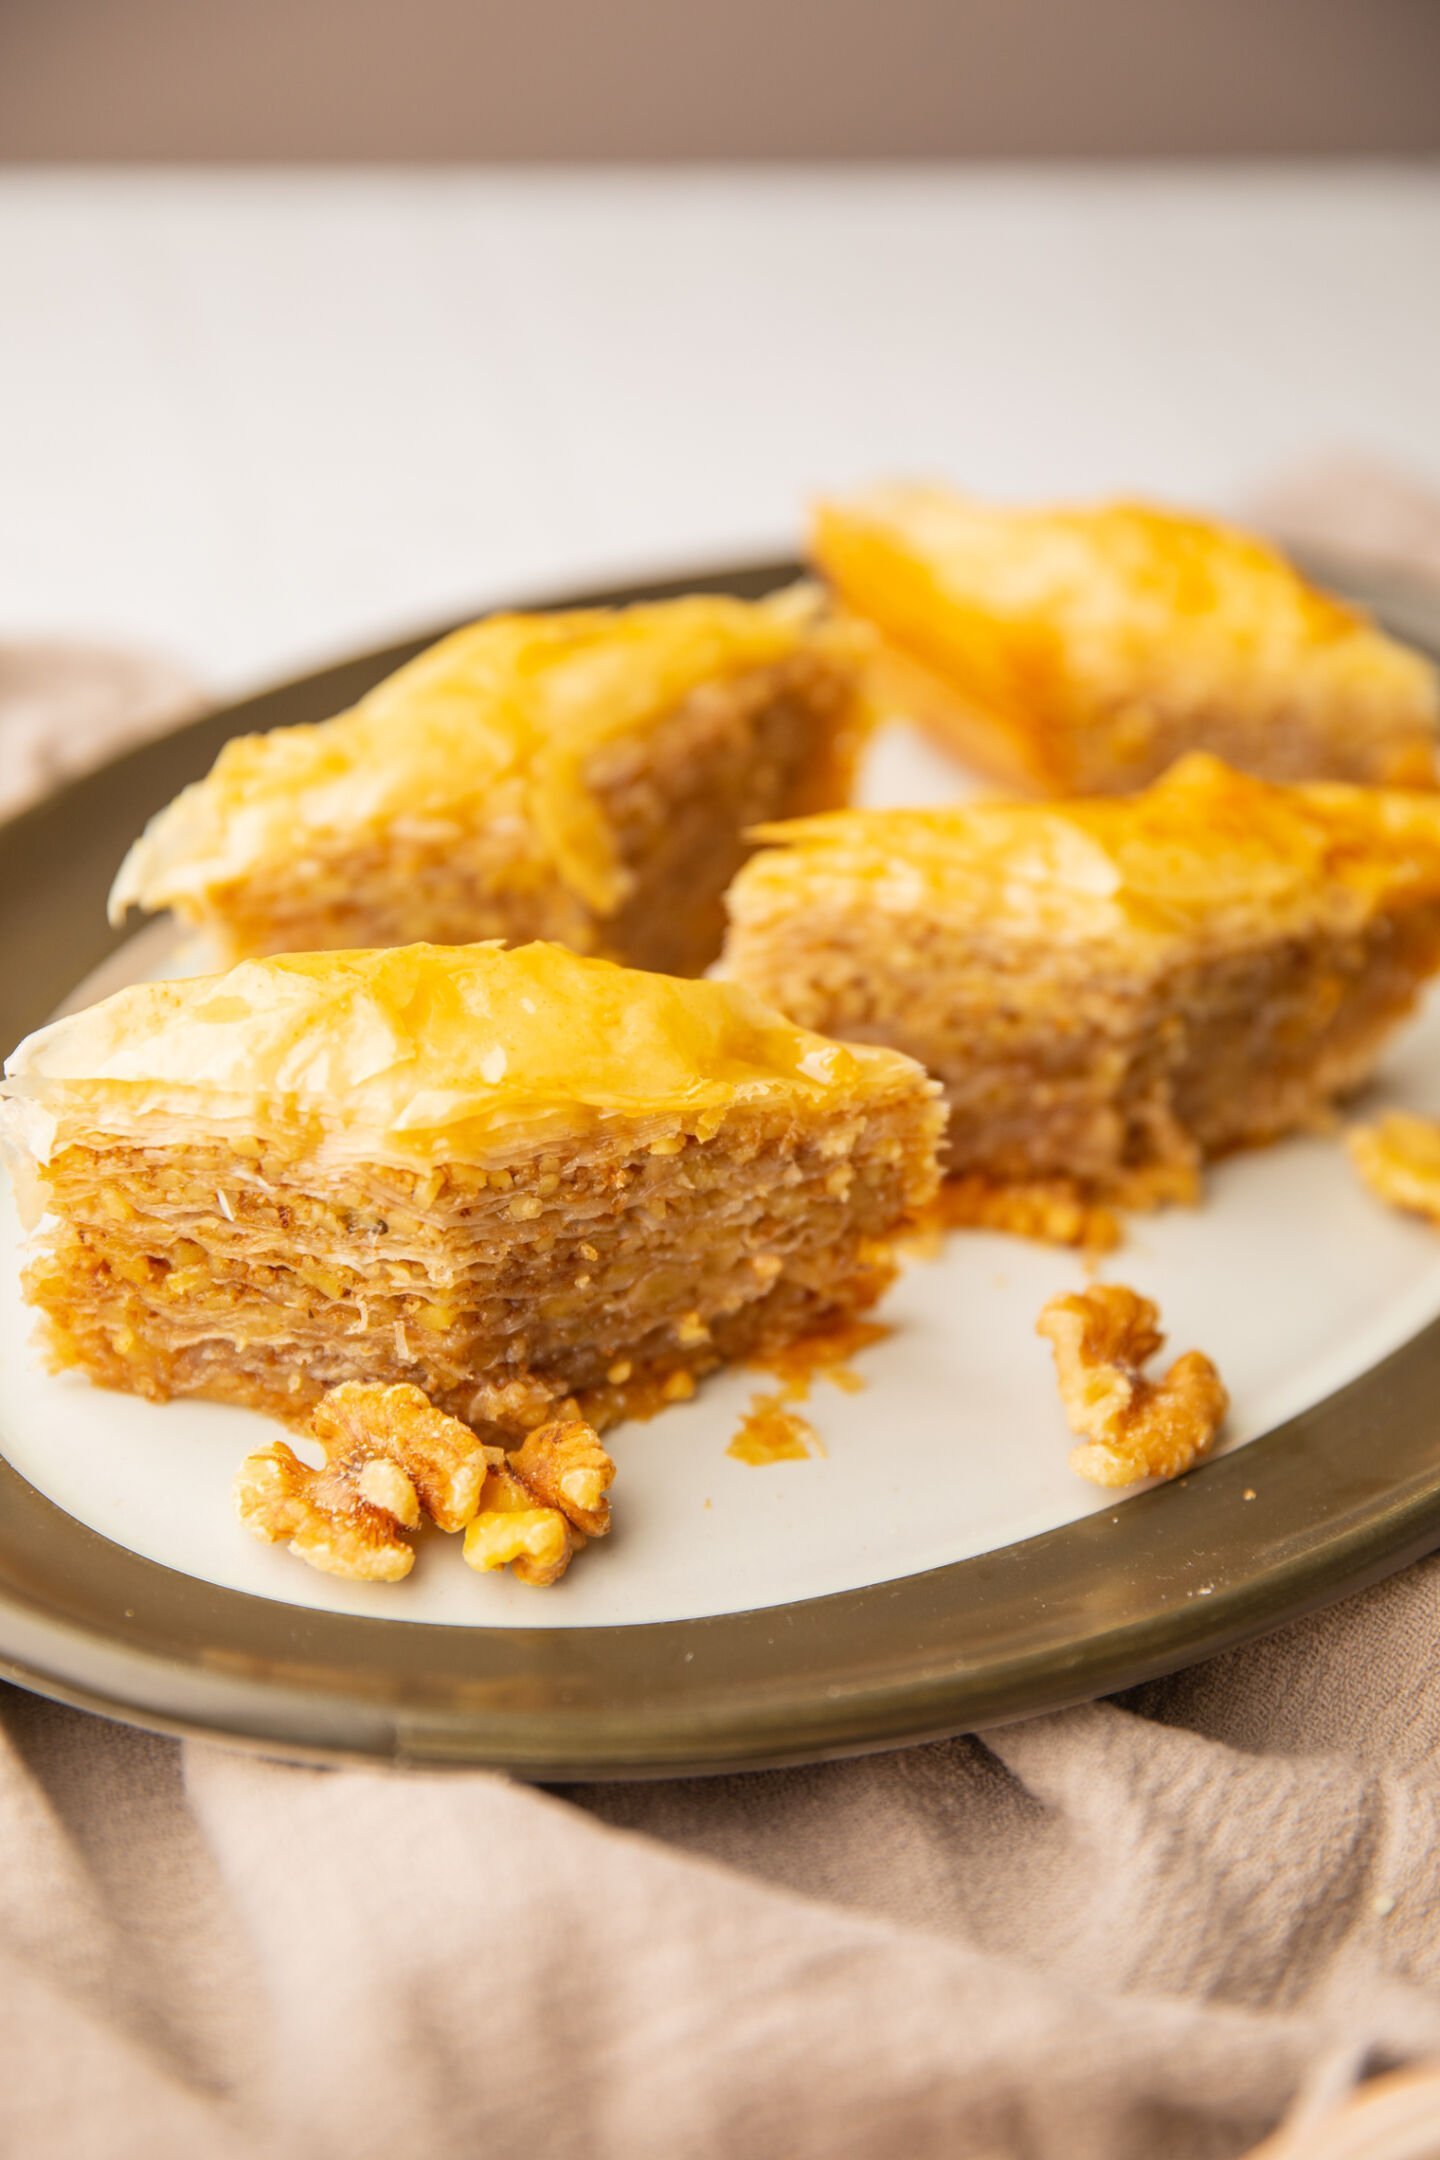 What to serve baklava